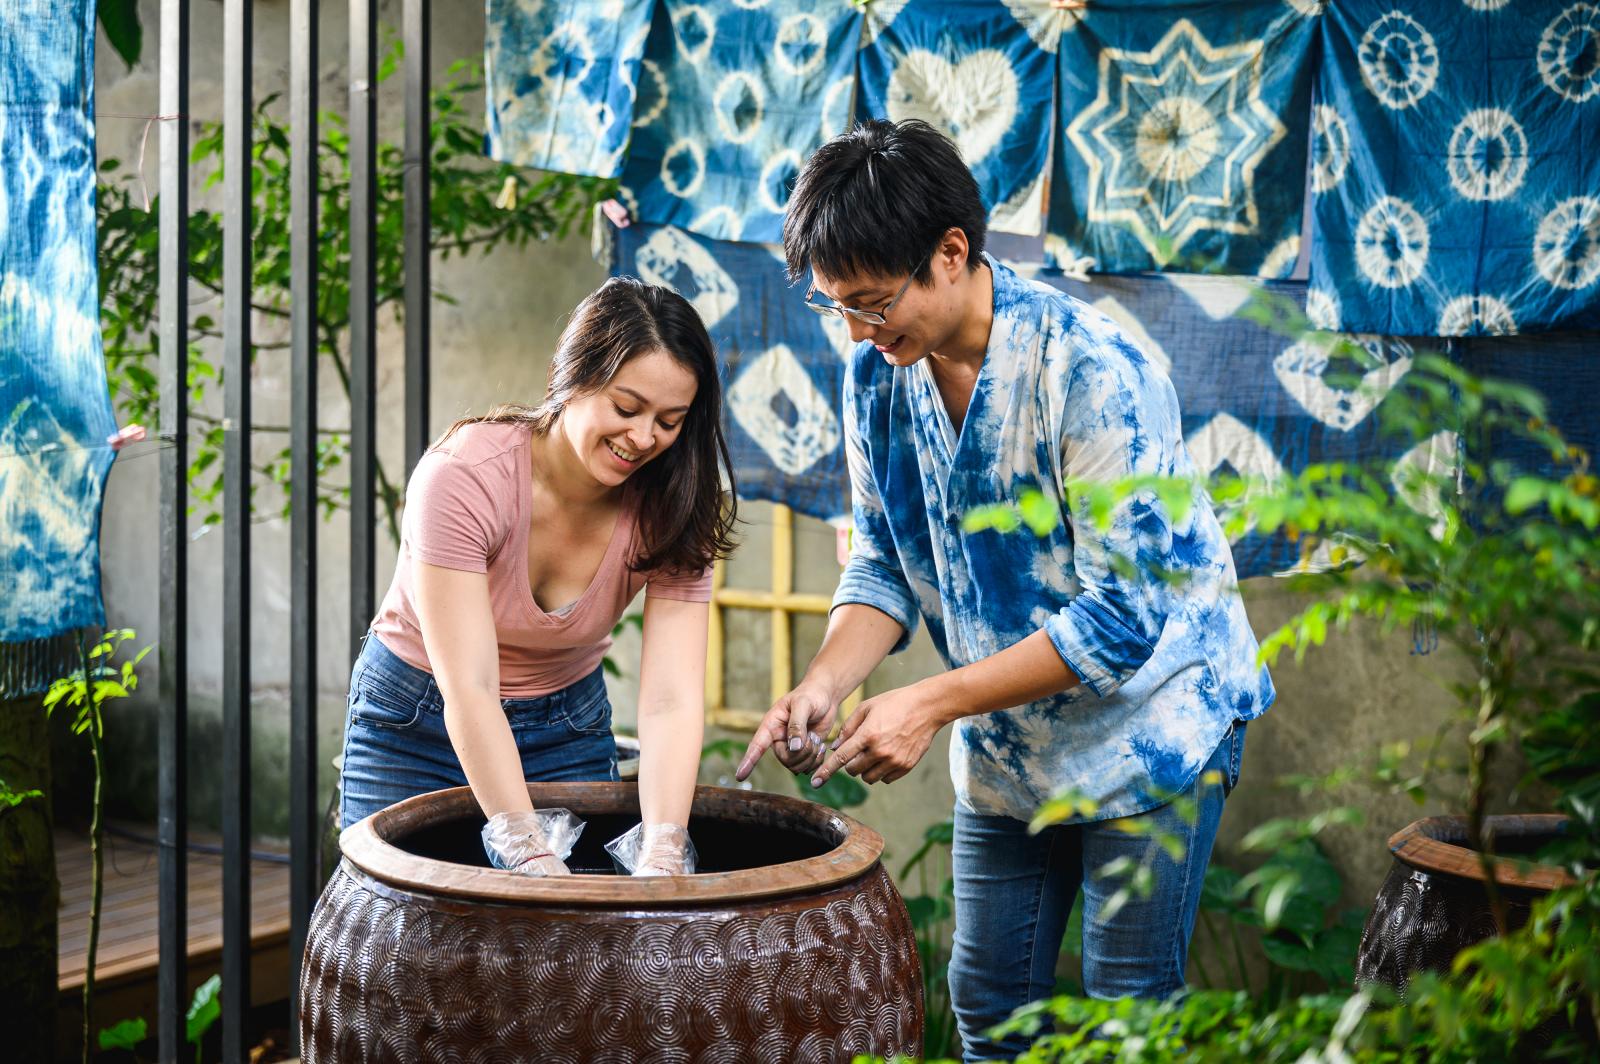 Try your hand at tie dye, using Sanxia's natural, locally grown ingredients